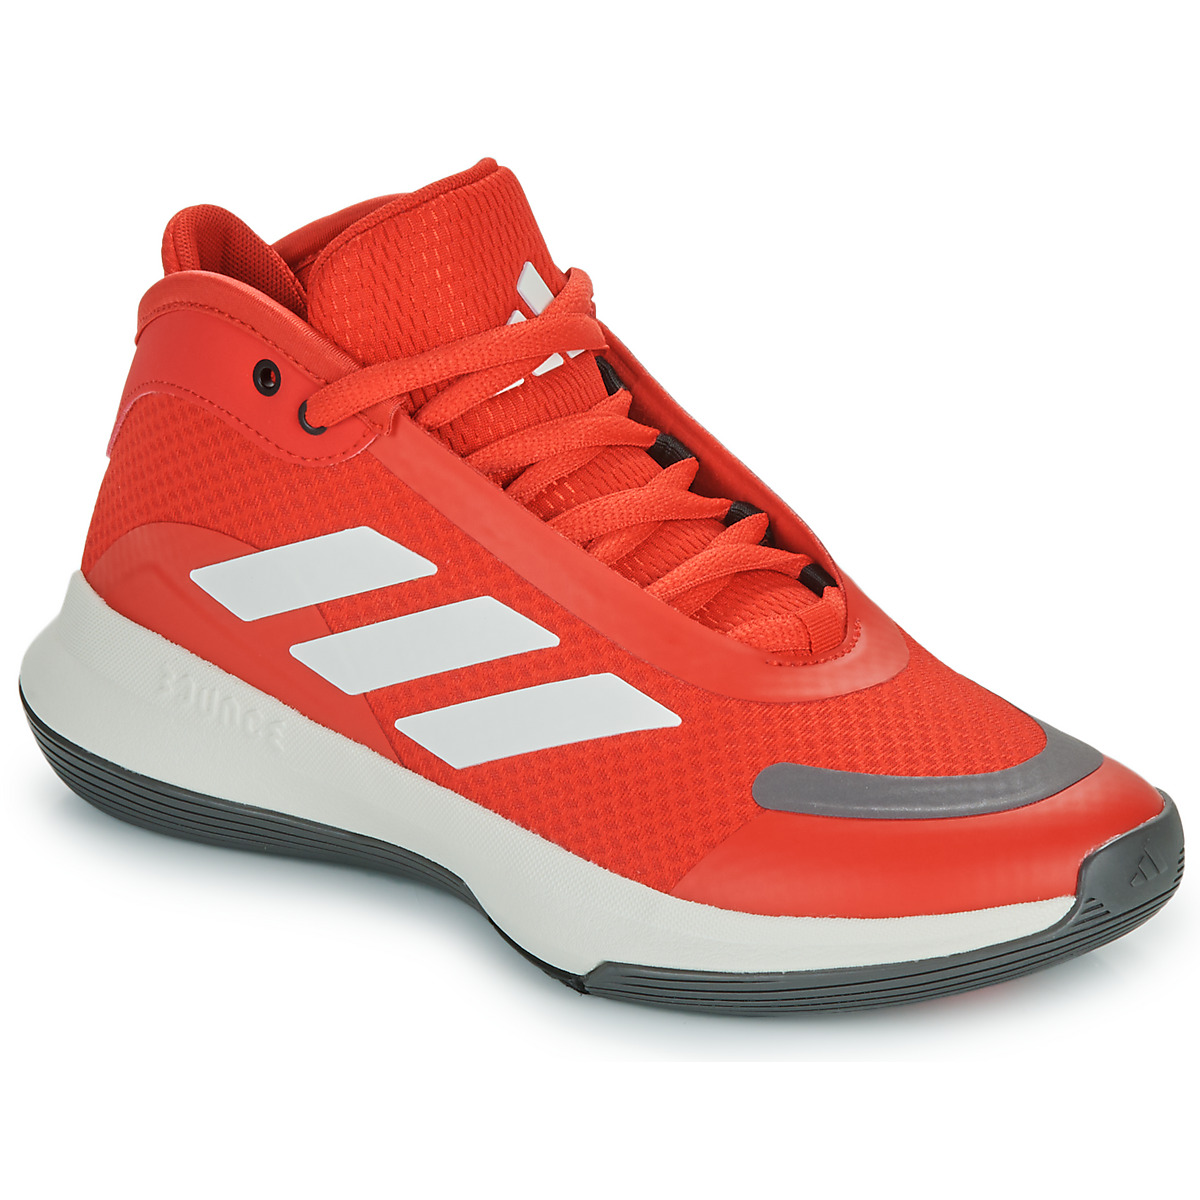 Adidas Bounce Legends Red